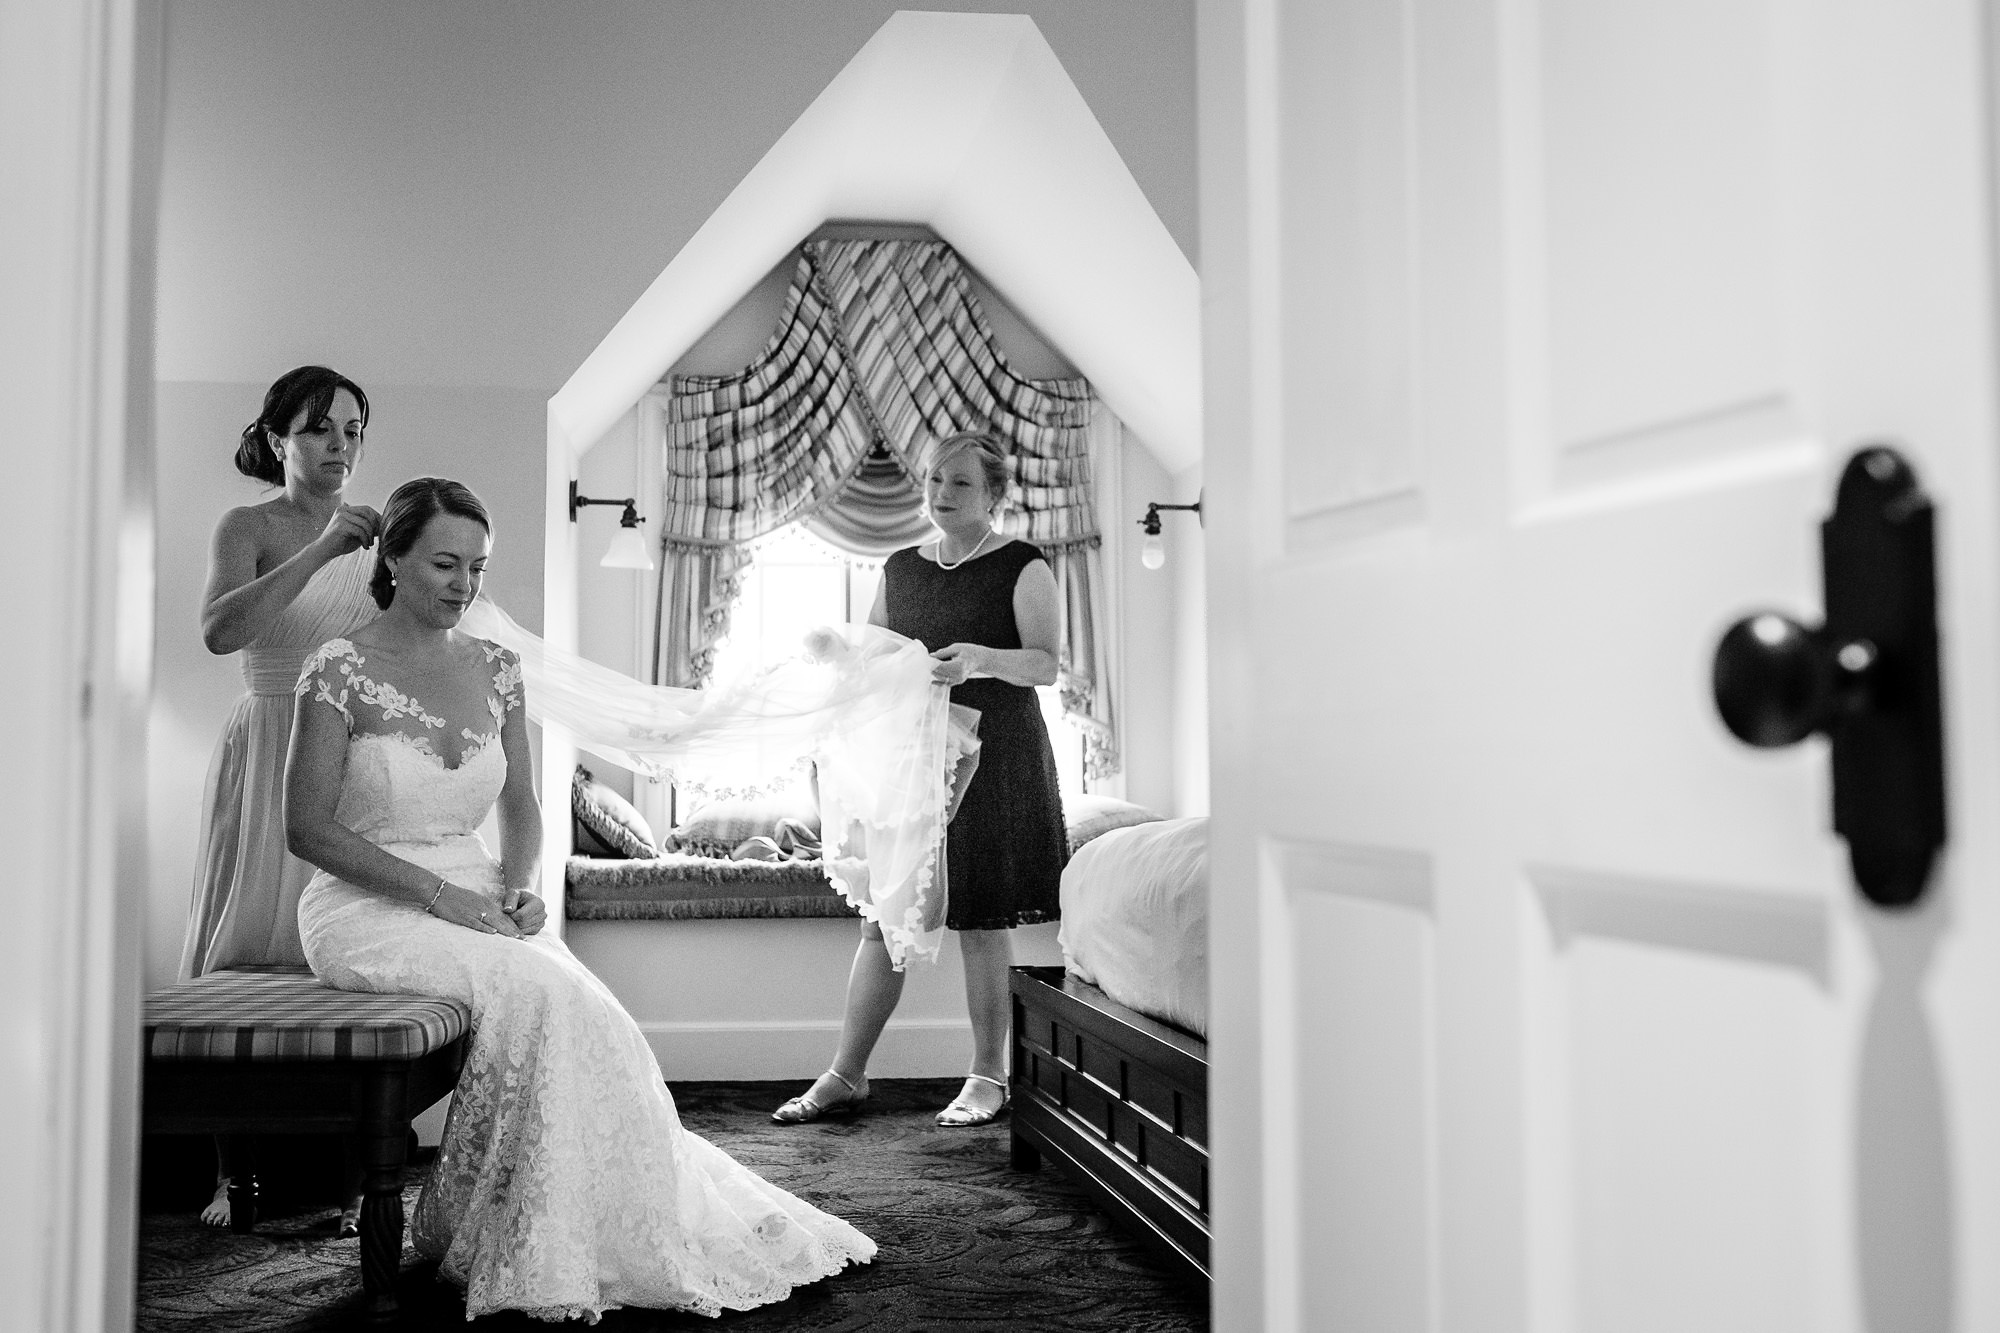 A bride getting ready for her wedding at the Harborside Hotel in Bar Harbor, Maine